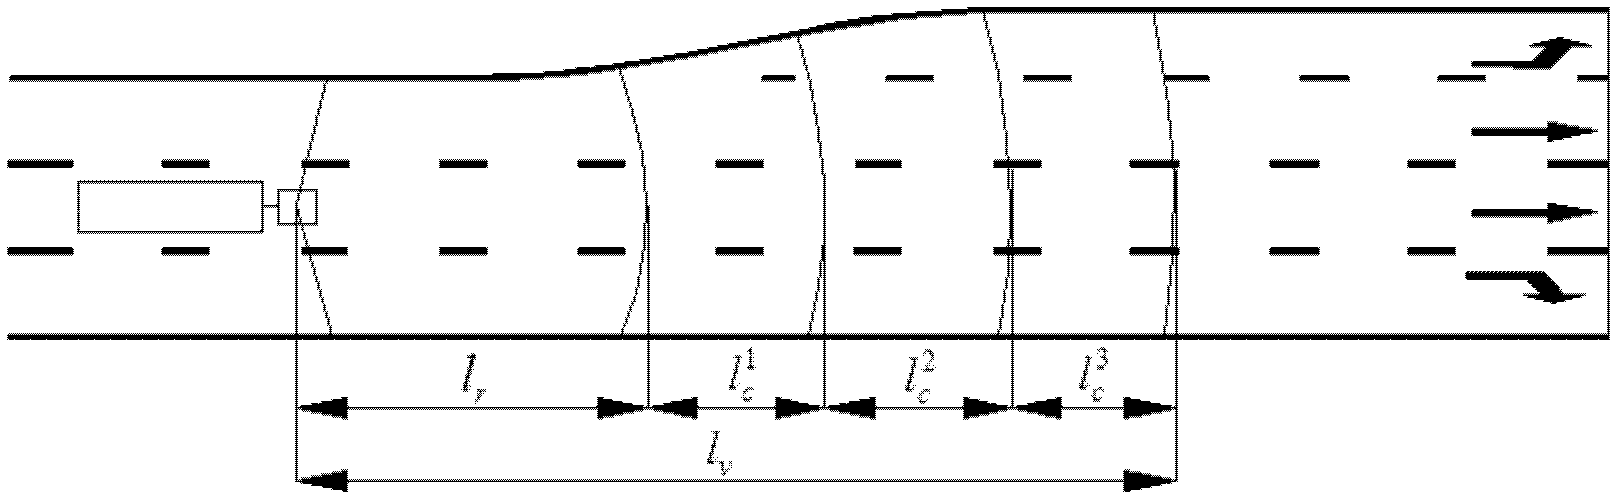 Method for determining minimum distance of road intersections in harbor district